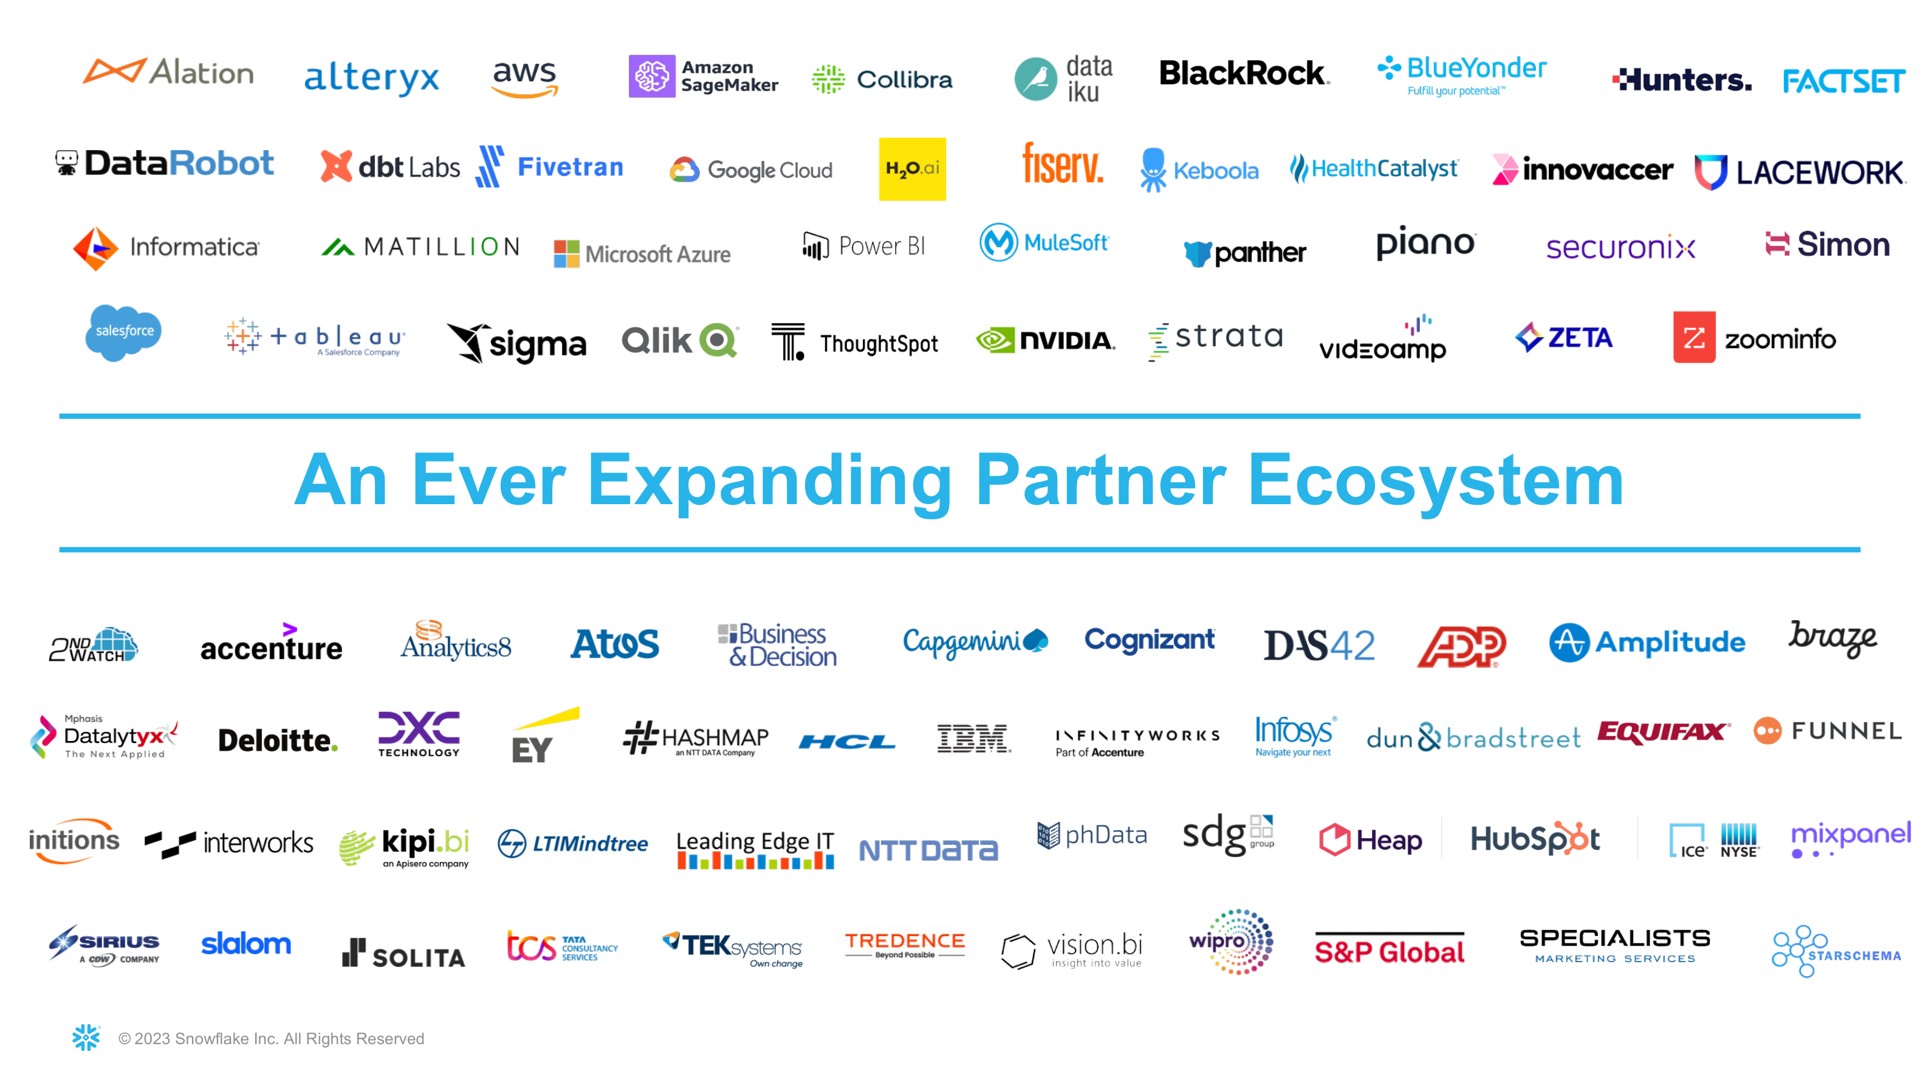 an ever expanding partner ecosystem gers vision sap global | Snowflake